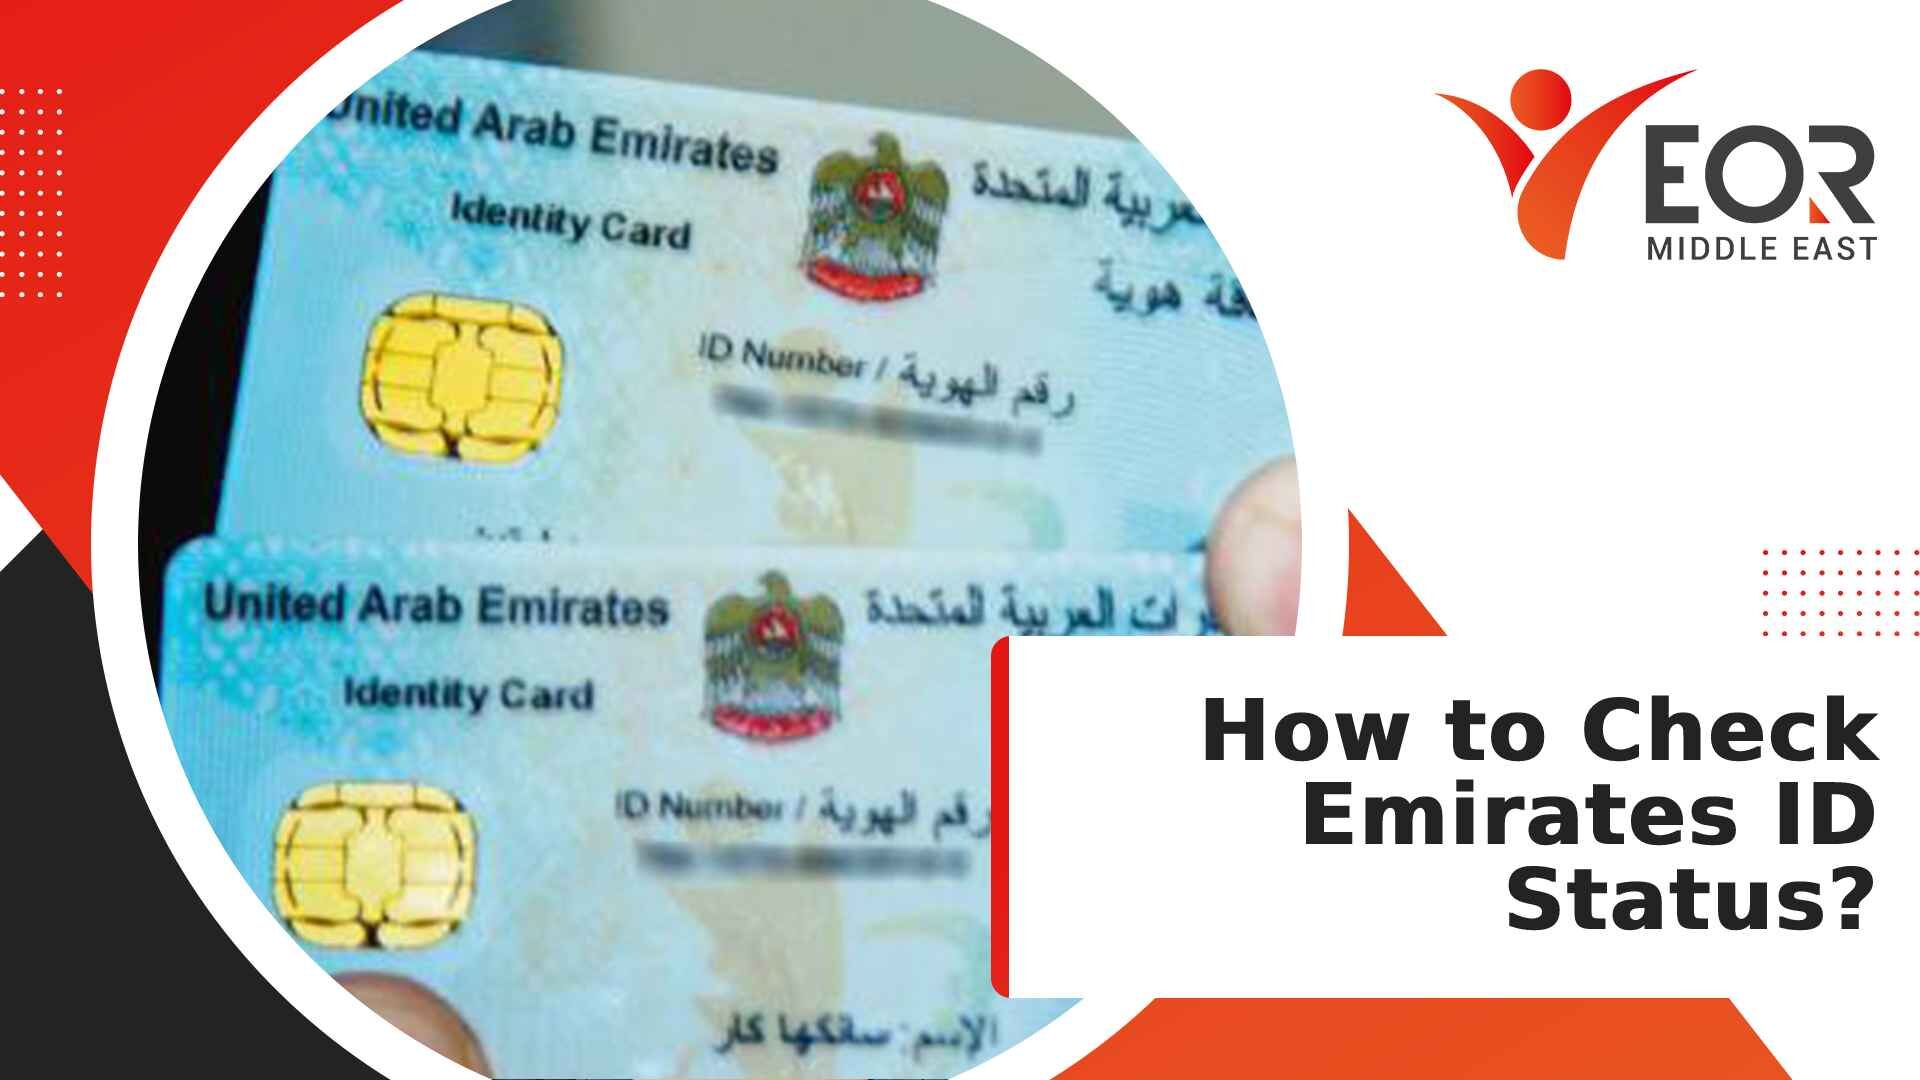 How to Check Emirates ID Status